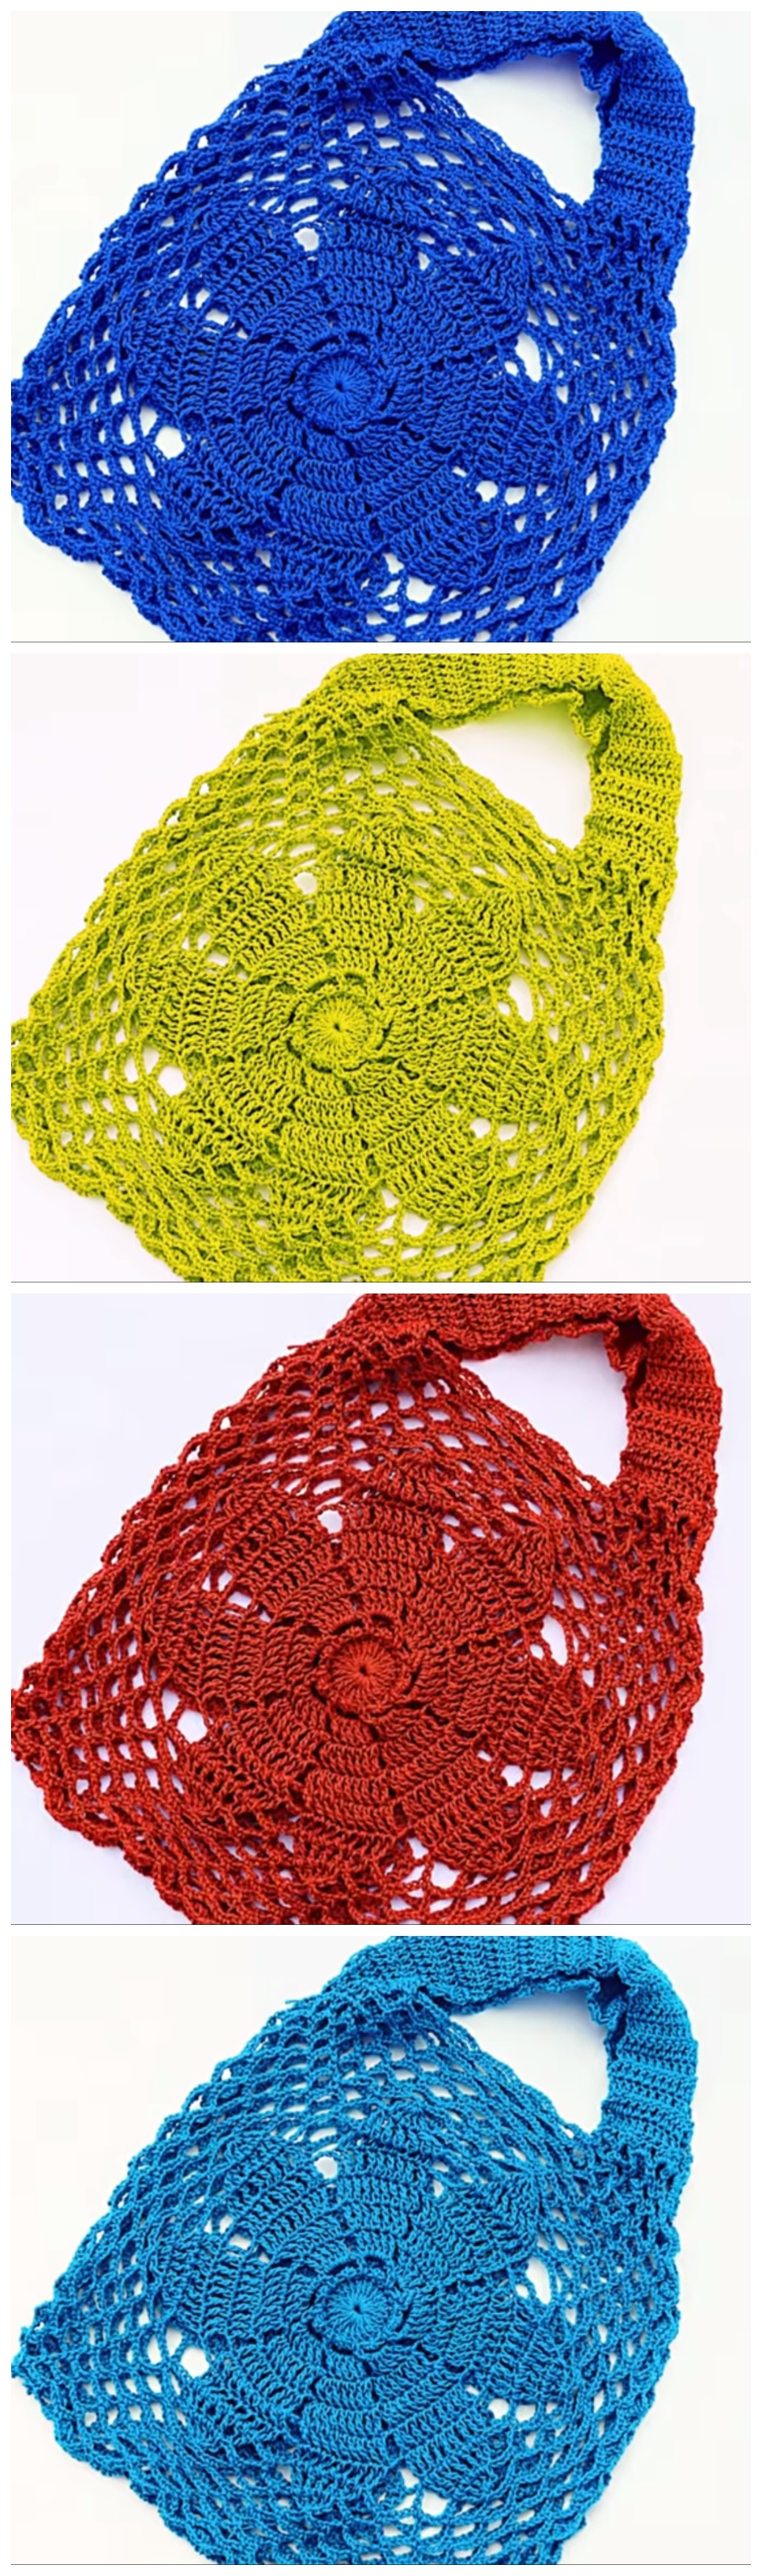 Crochet Fast And Easy Market Bag